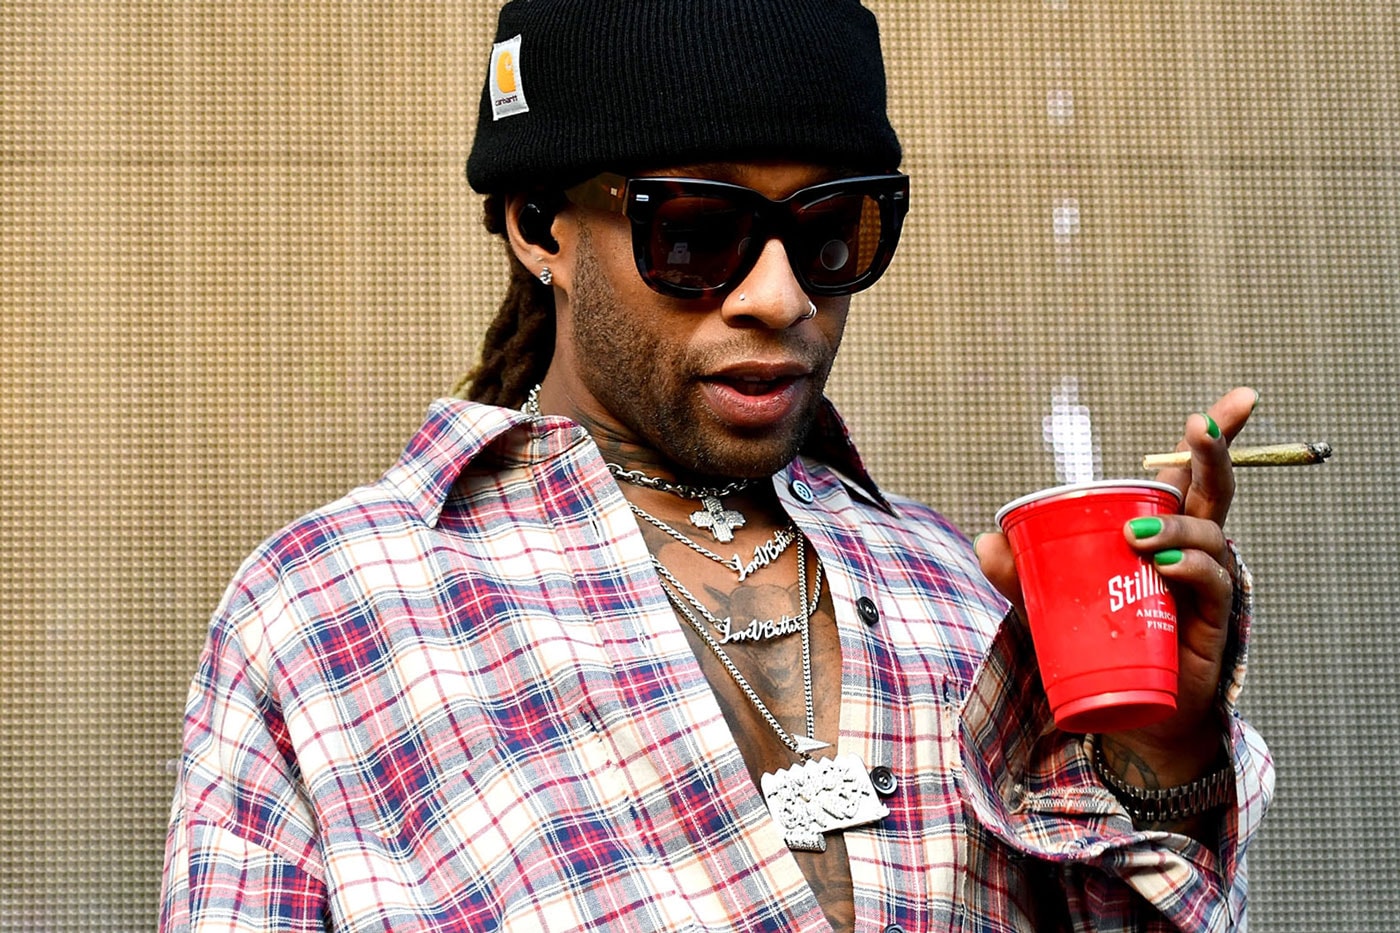 Ty Dolla $ign featuring E-40 - Saved (Produced by DJ Mustard)